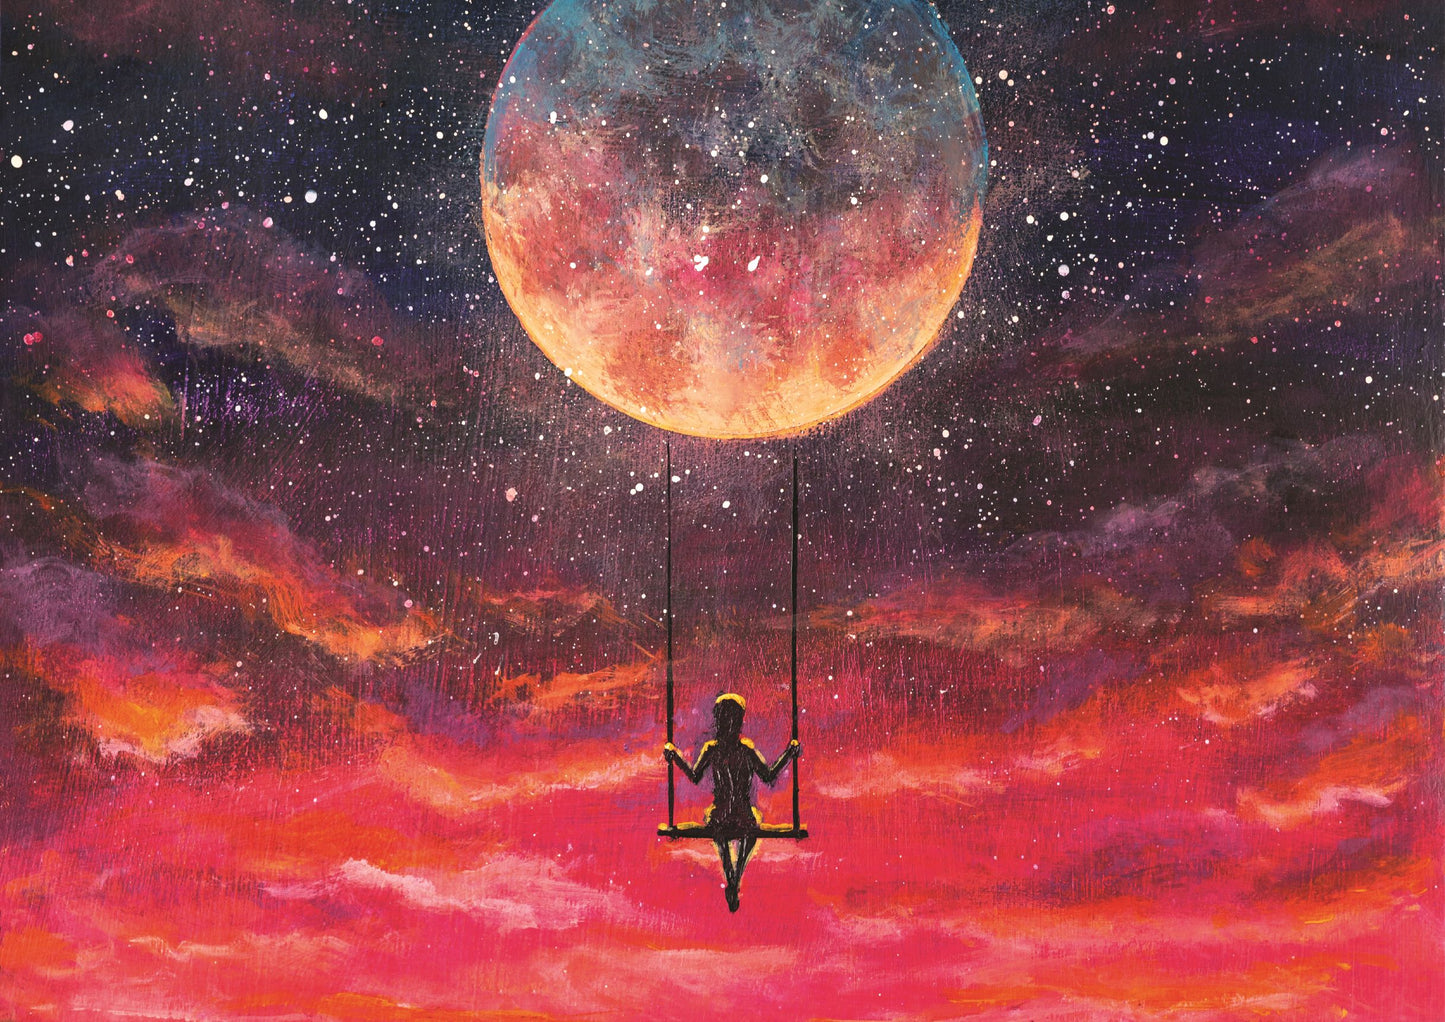 Painting Girl guy rides on swing in sky against background of beautiful purple pink sunset and starry sky.